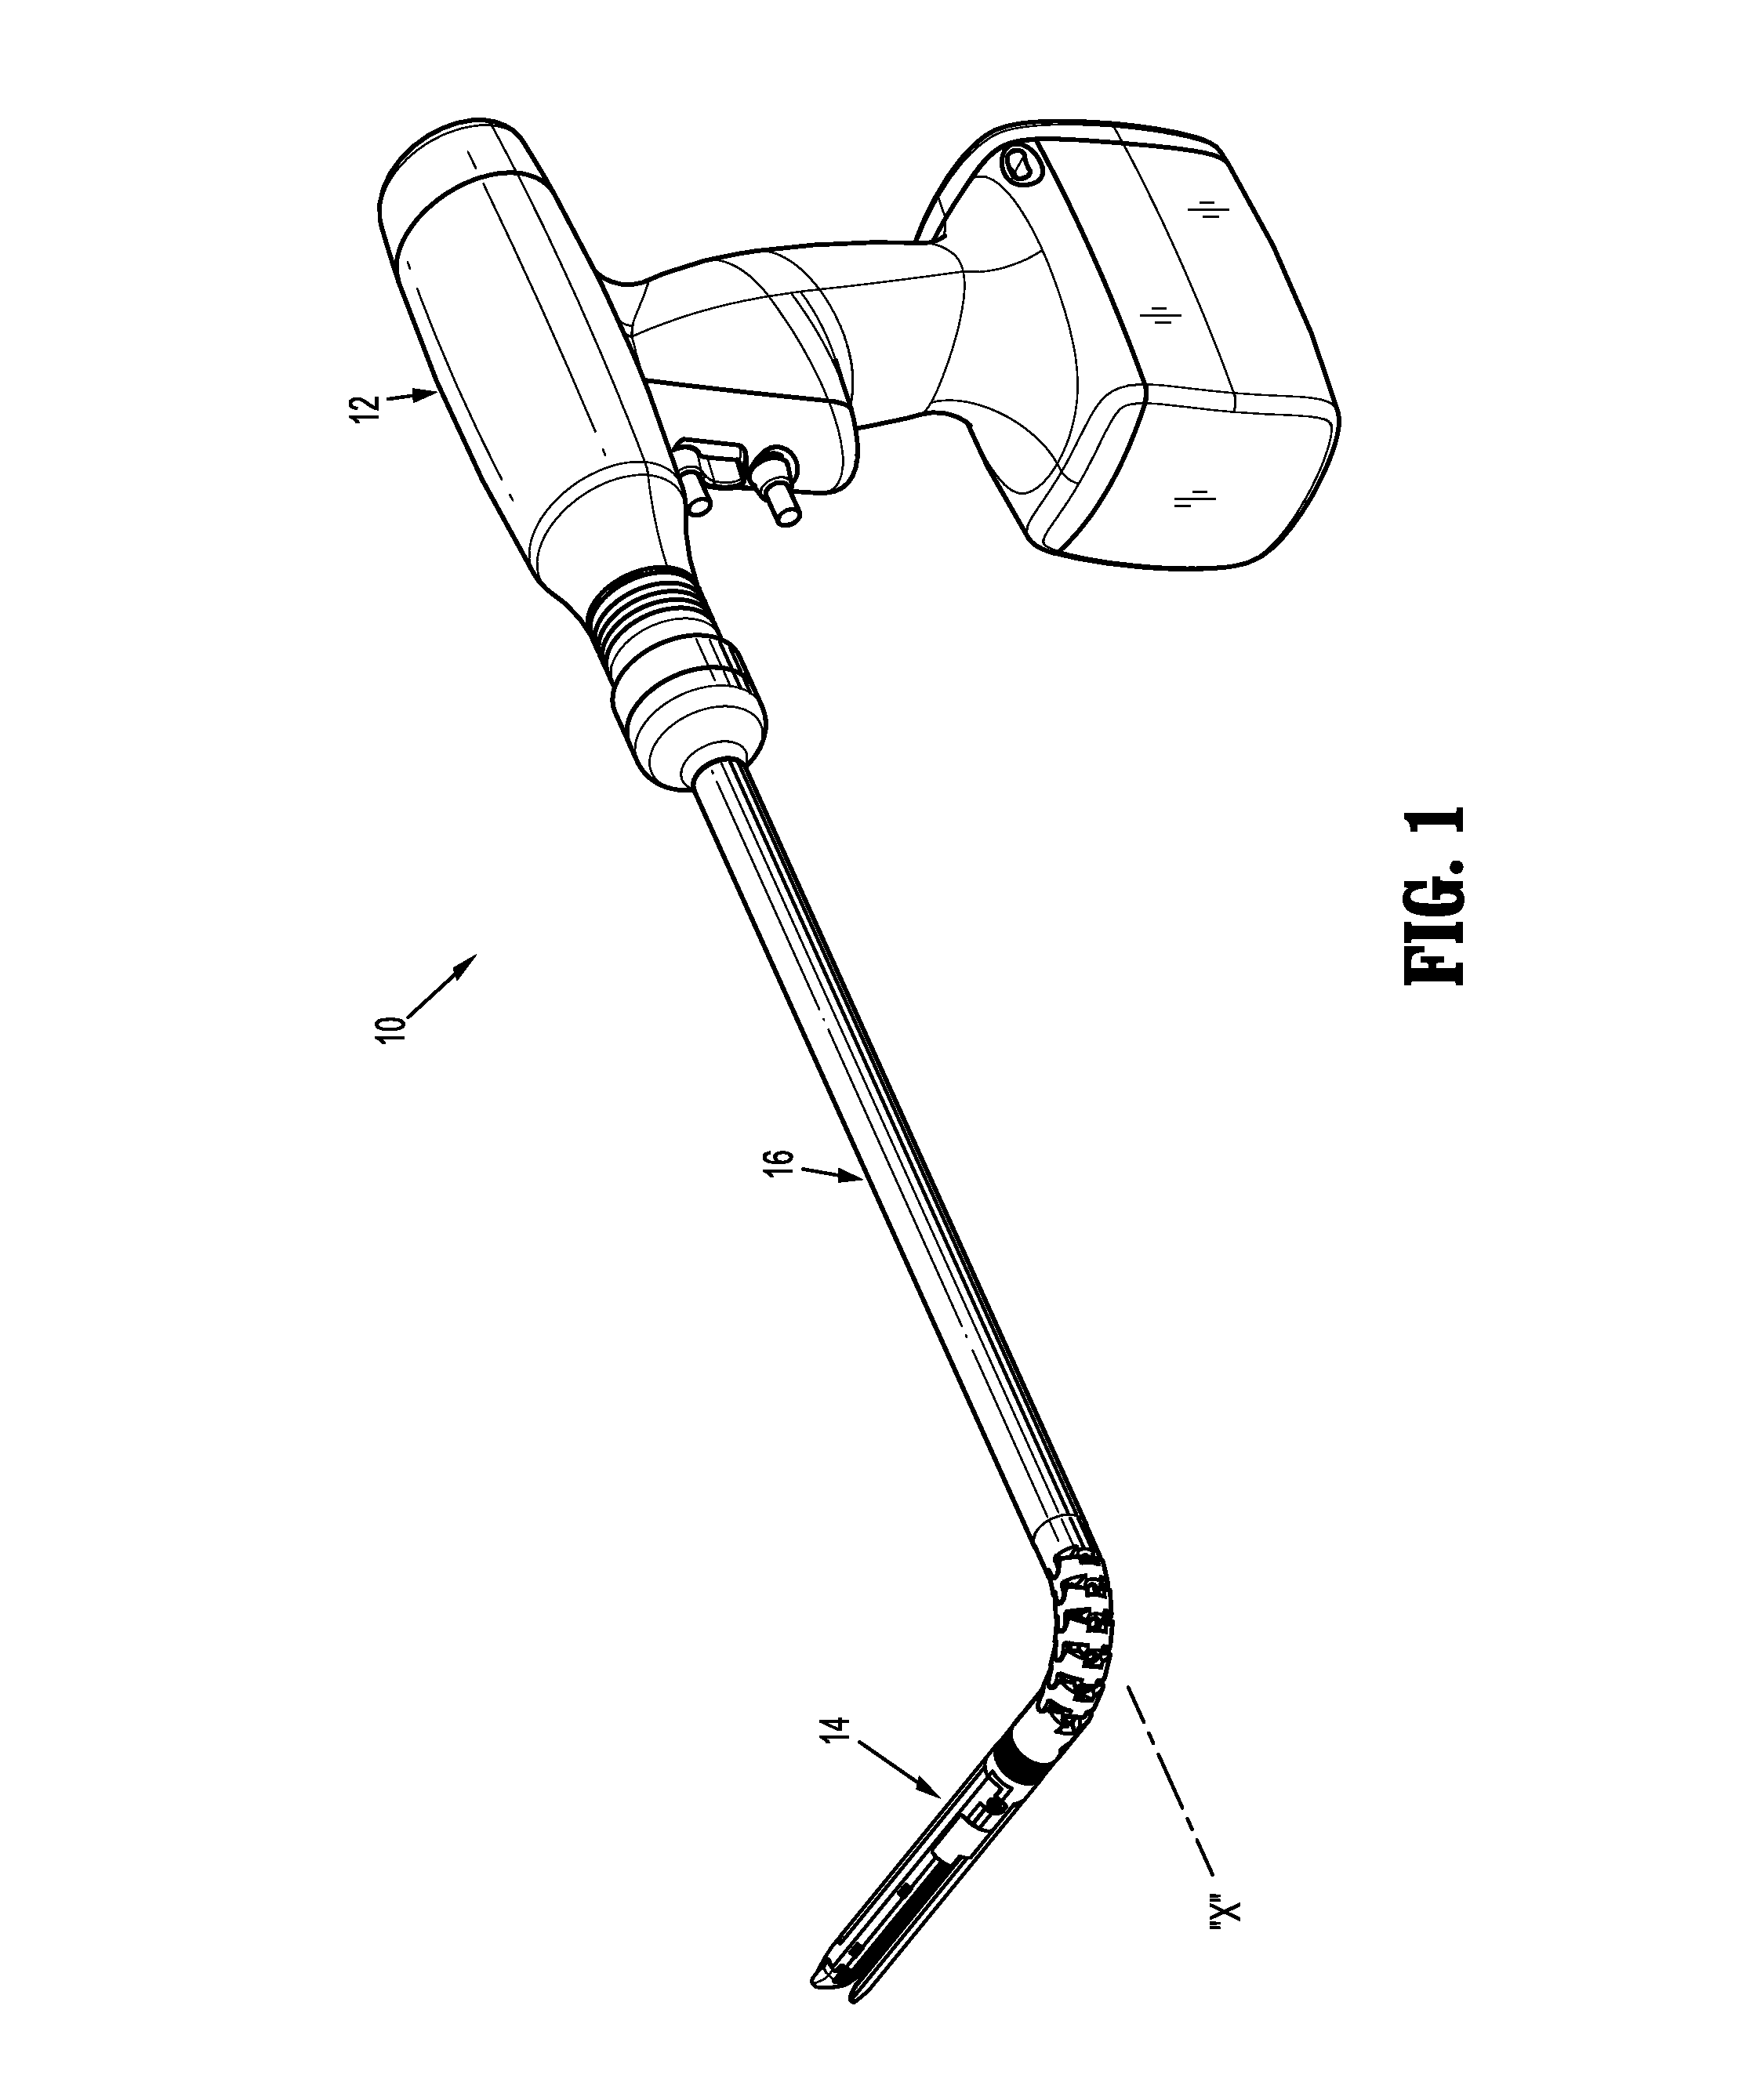 Systems and methods for determining an end of life state for surgical devices